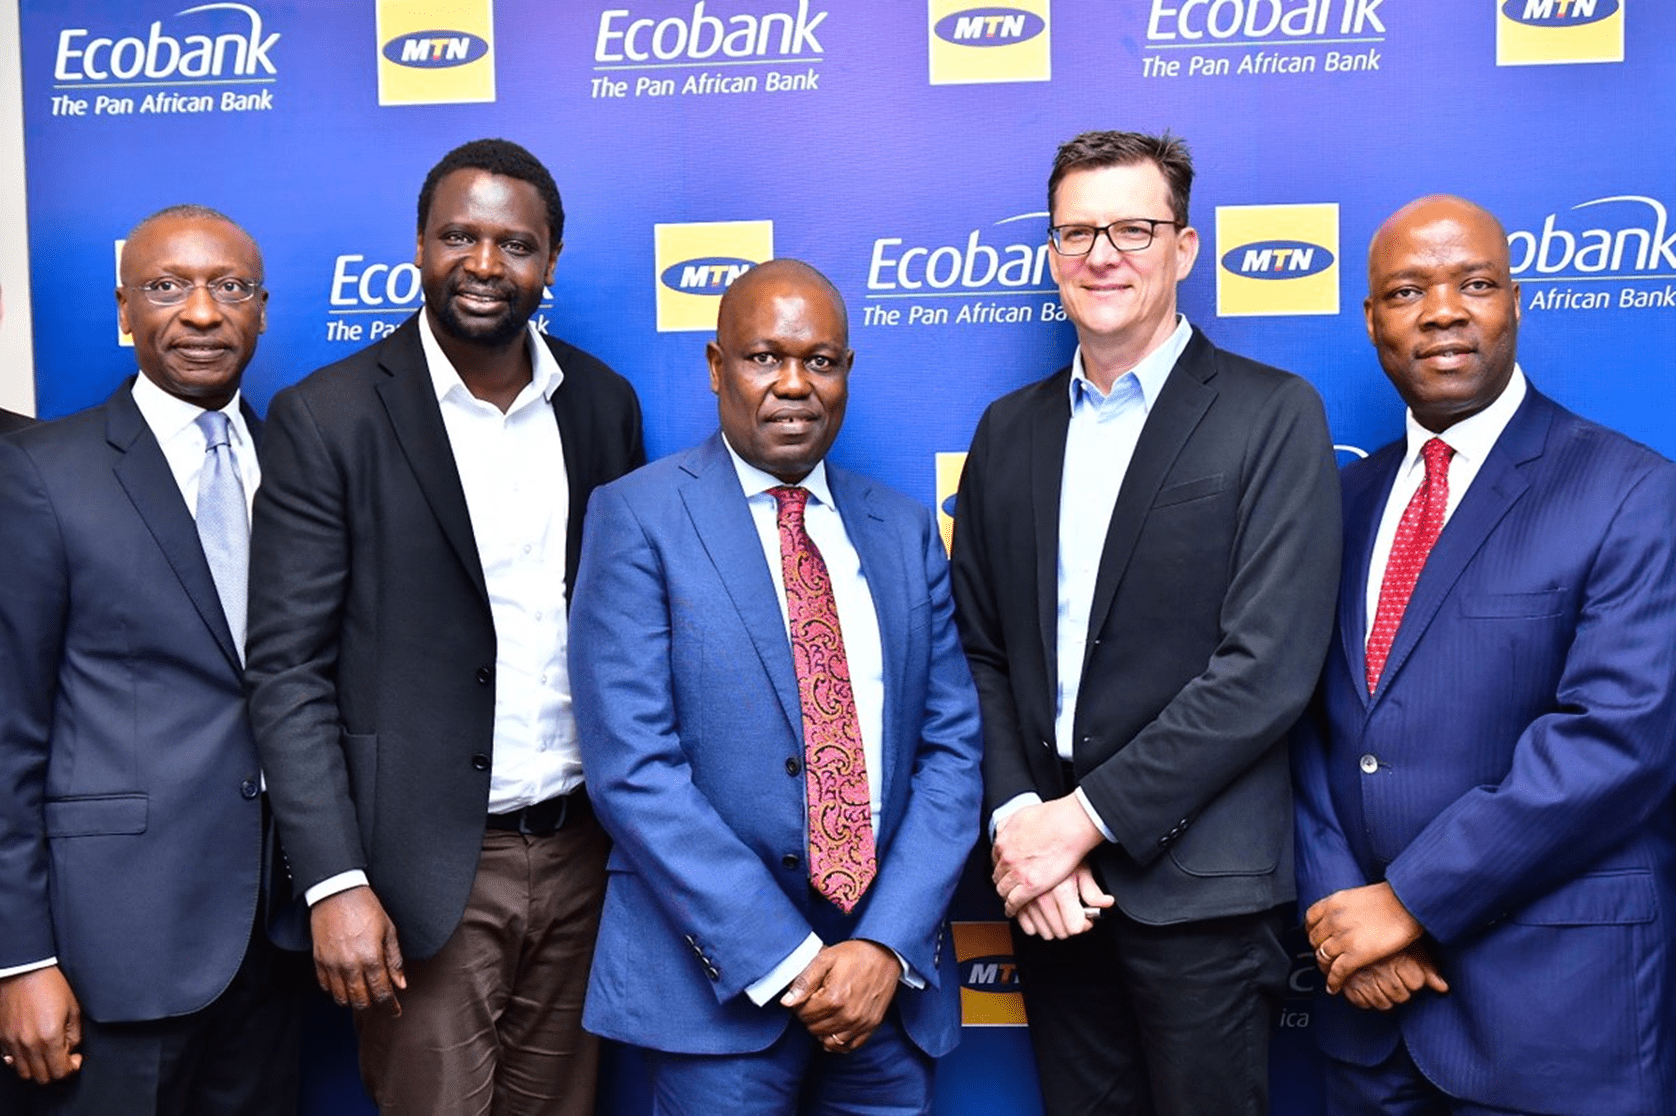 (L-R) Charles Kie, Managing Director, Ecobank Nigeria Ltd; Serigne Dioum, MTN’s Executive, Mobile Financial Services; Ade Ayeyemi, Group CEO, Ecobank Transnational Incorporated (ETI), Rob Shuter, group CEO of MTN and Patrick Akinwuntan, Group Executive, Ecobank Transnational Incorporated (ETI).